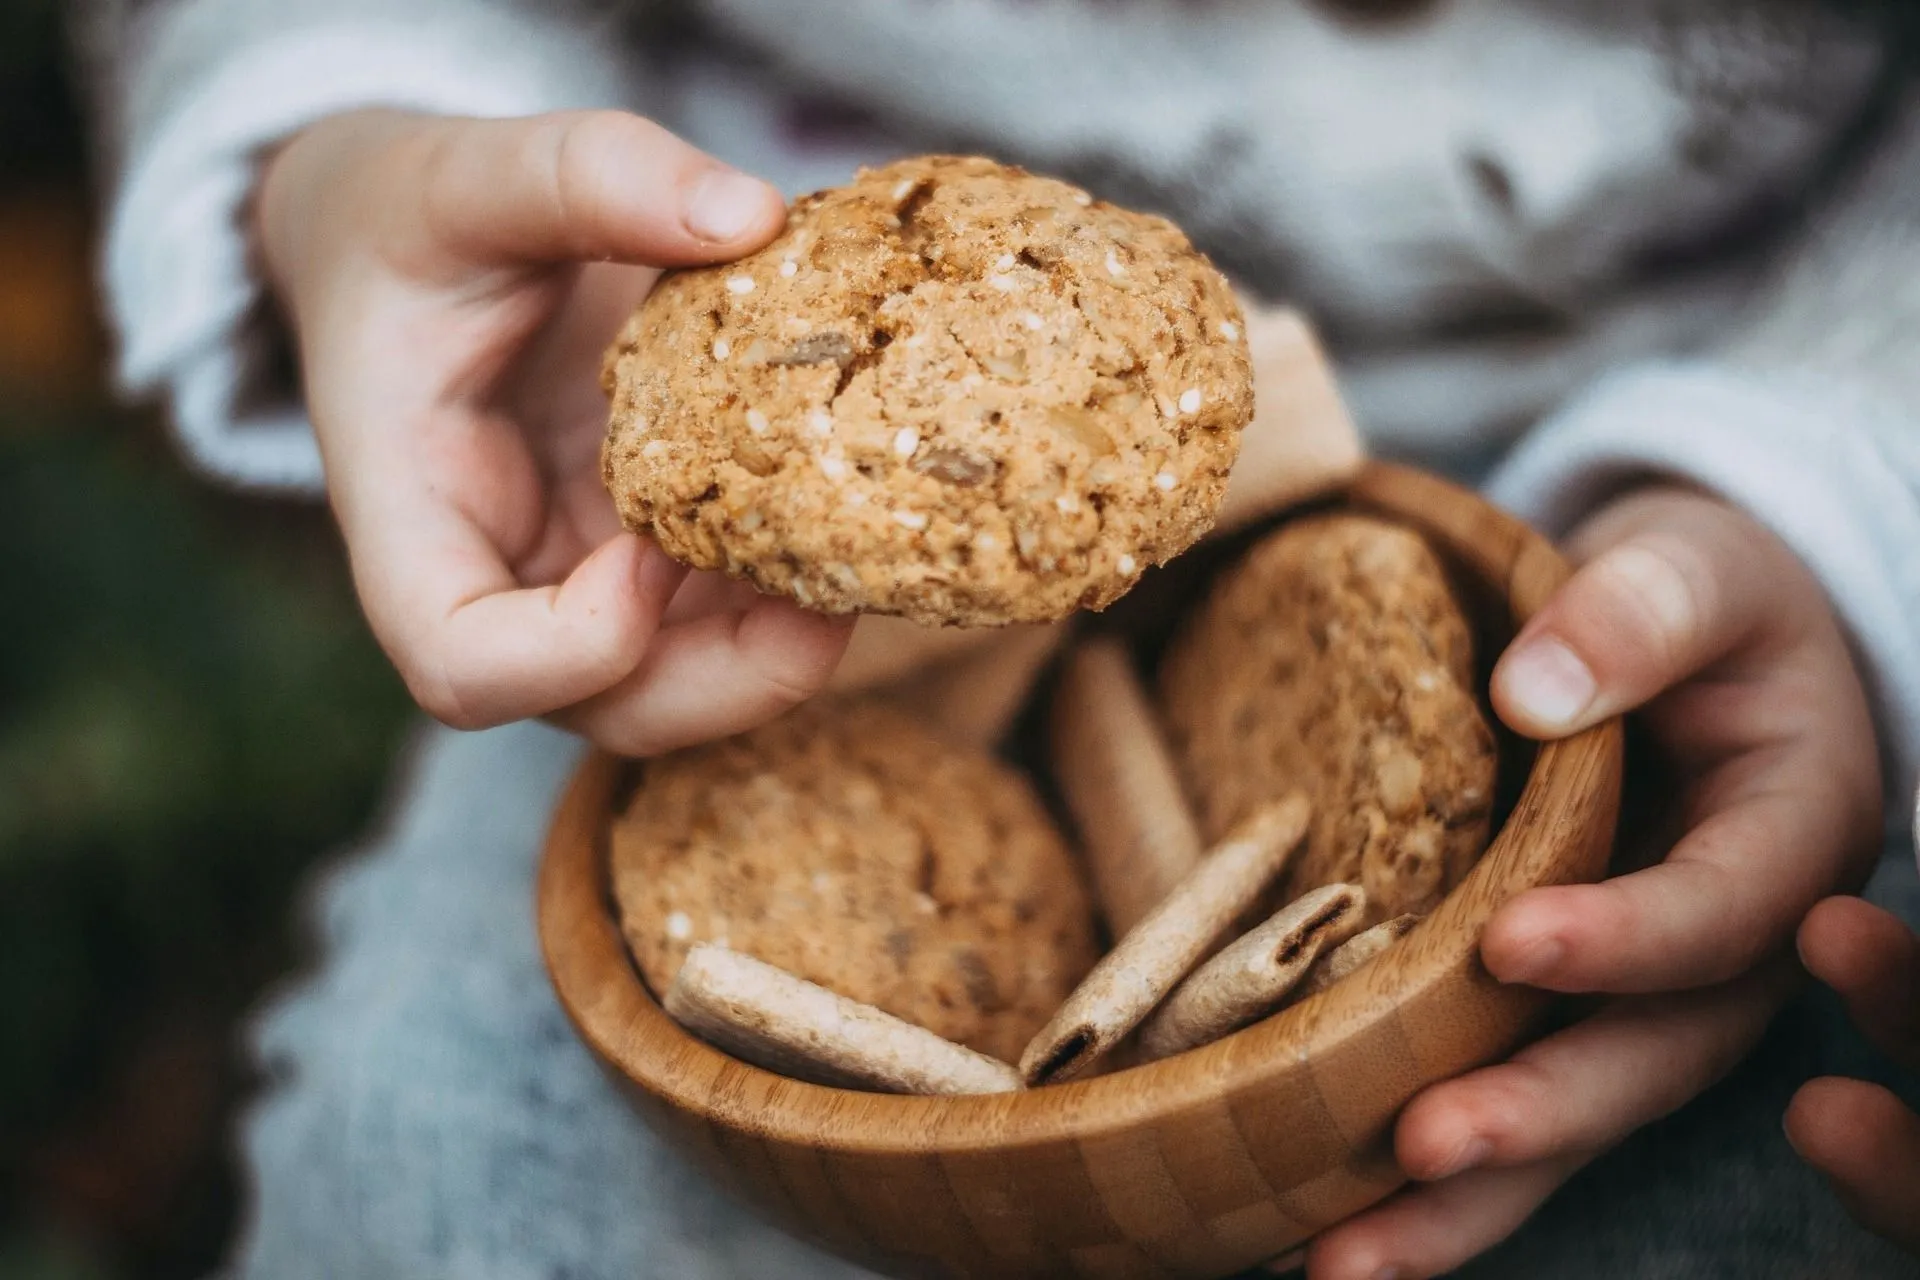 National Oatmeal Cookie Day is celebrated on April 30 every year.